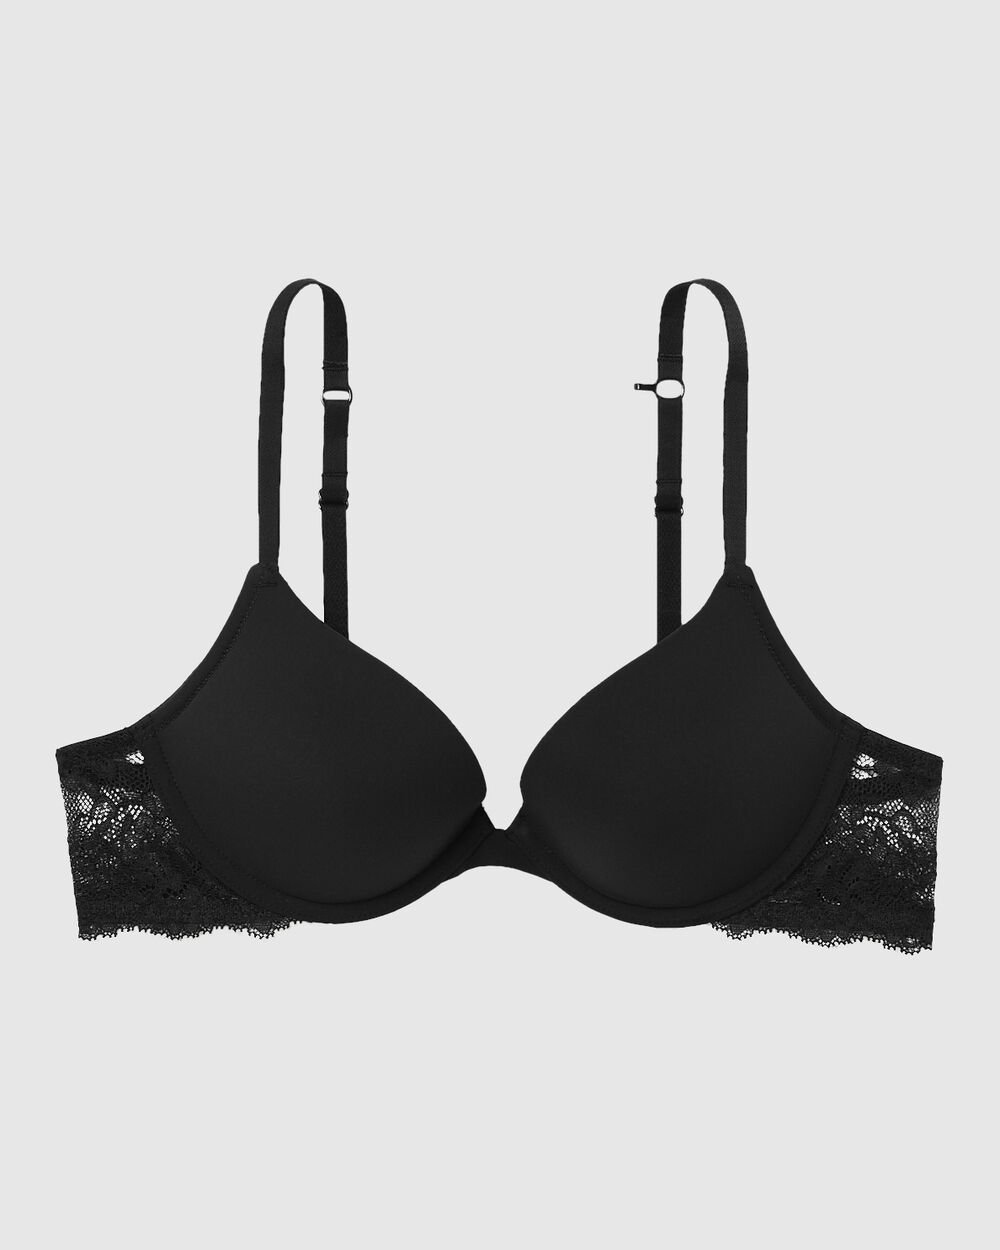 C cup unlined bra french style light weight women underwear sexy